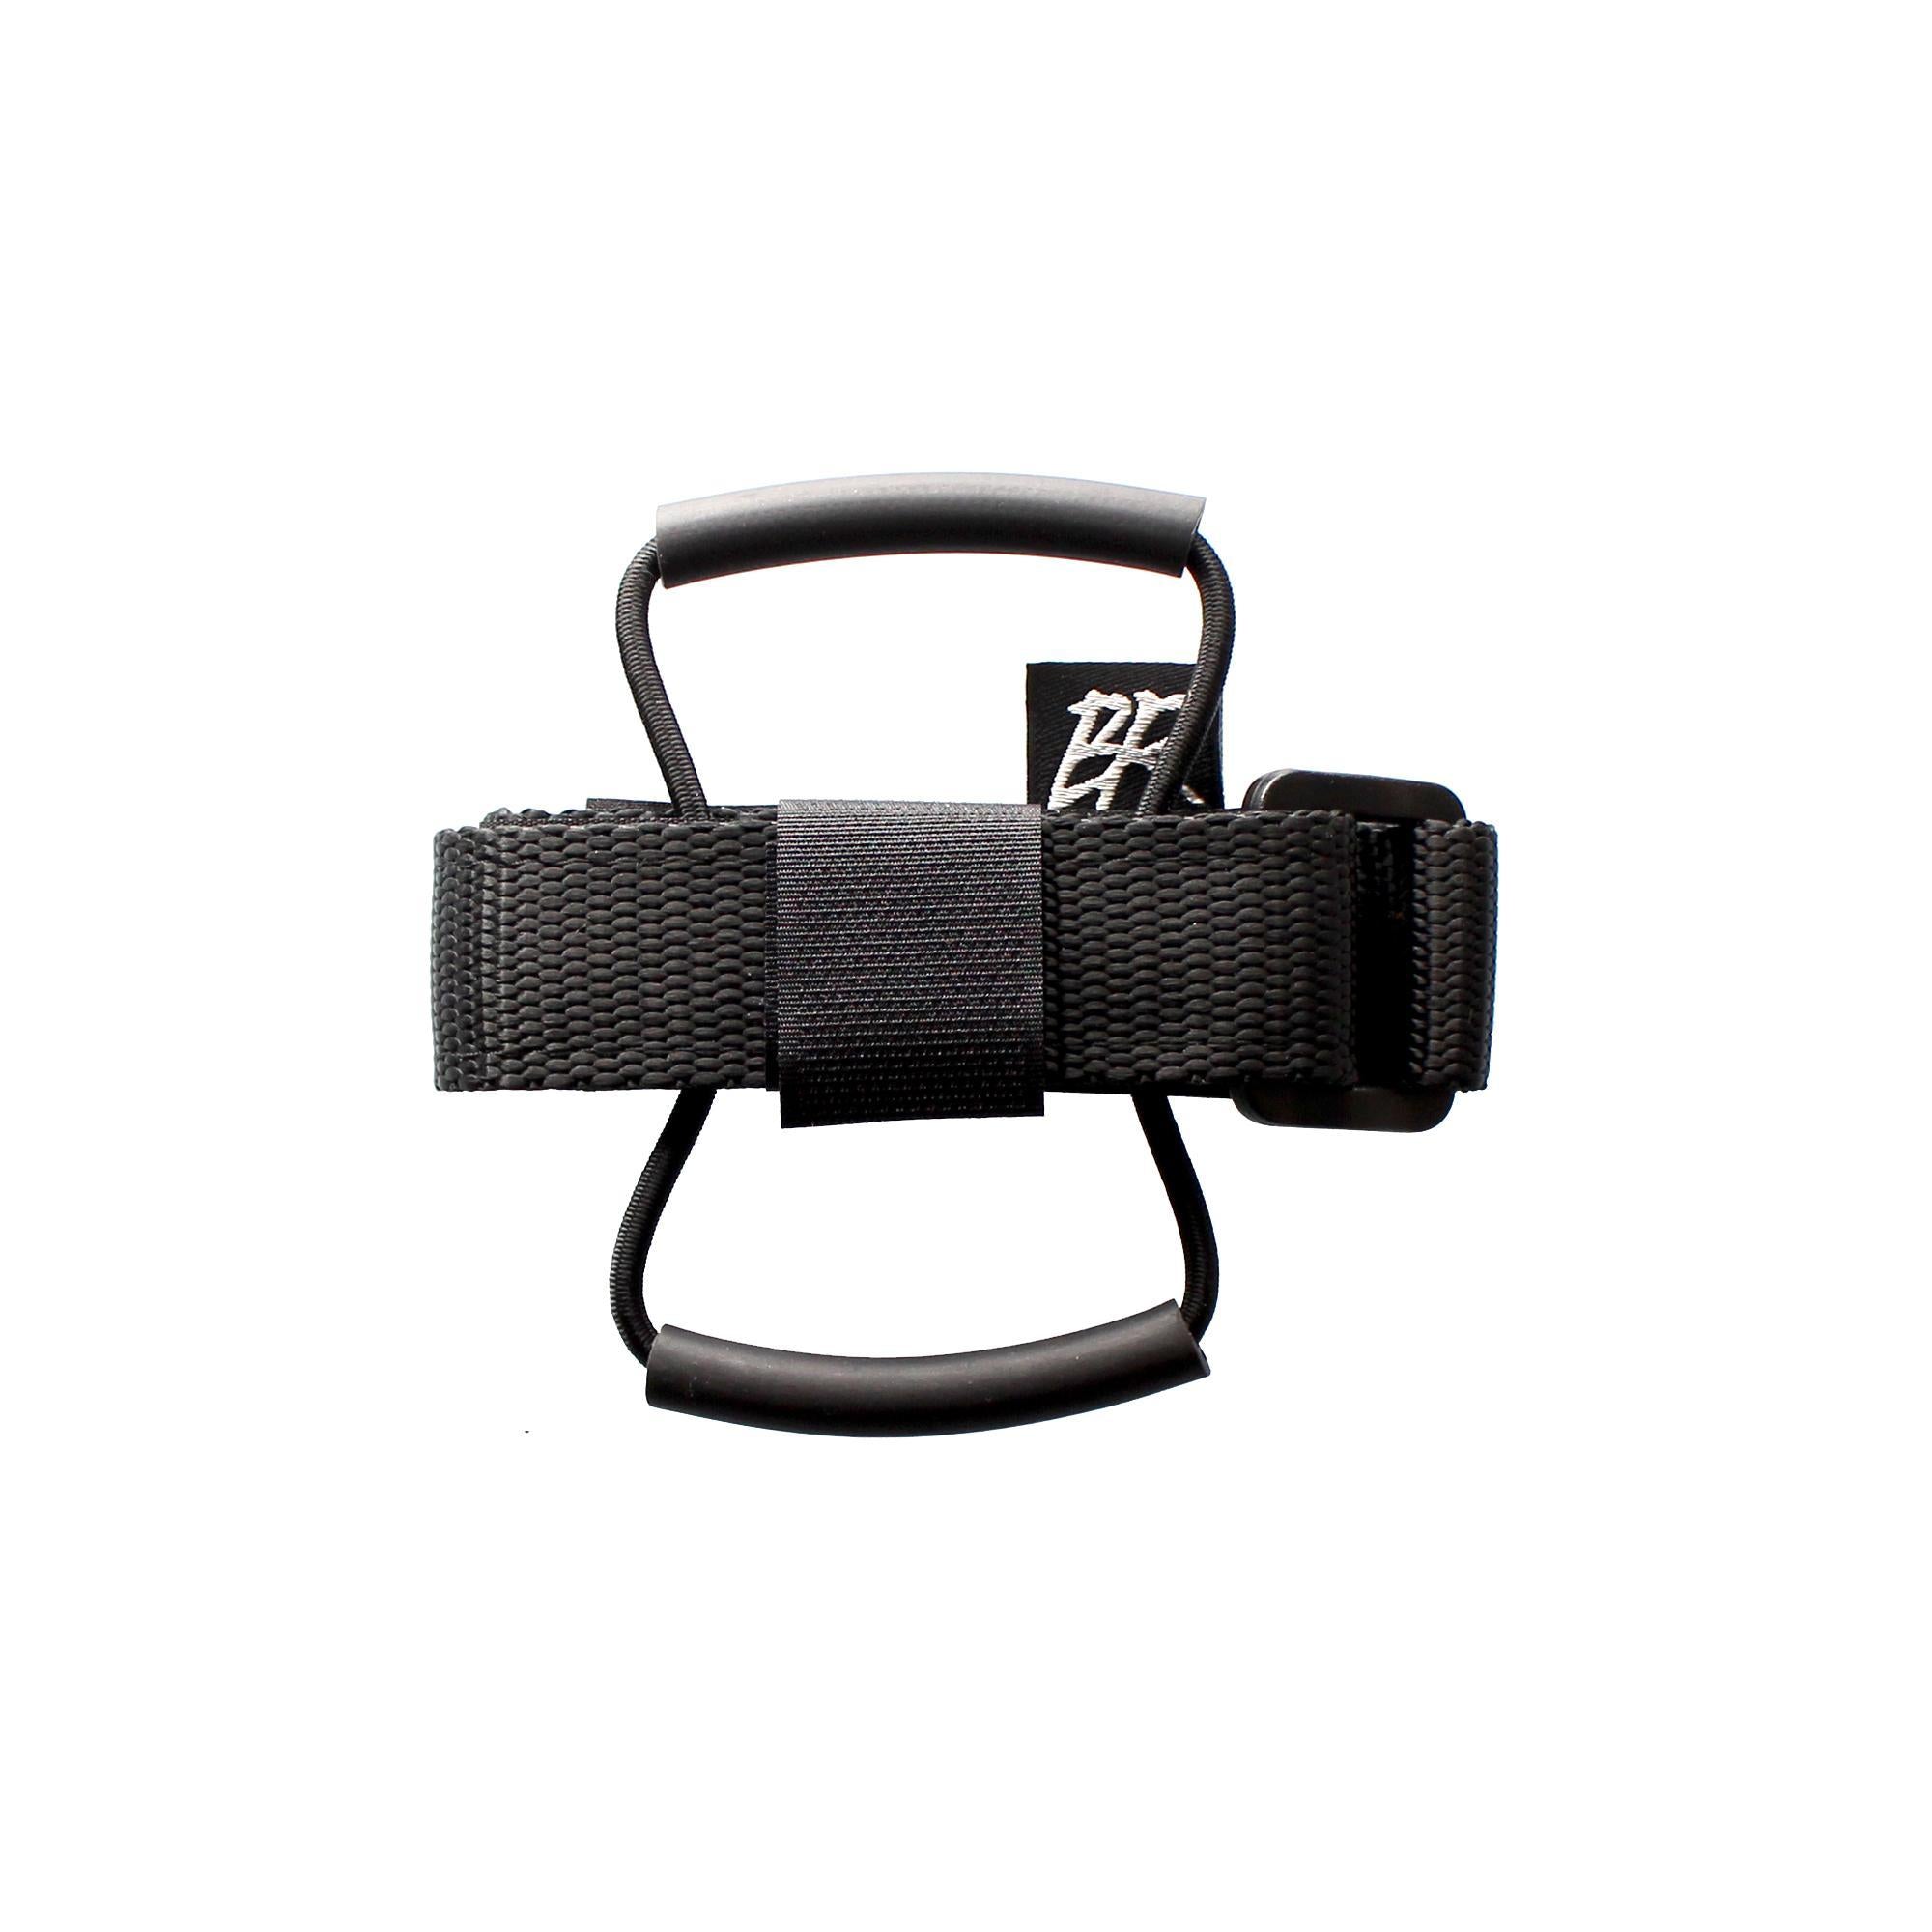 Back country research race strap for mtb frames black in colour